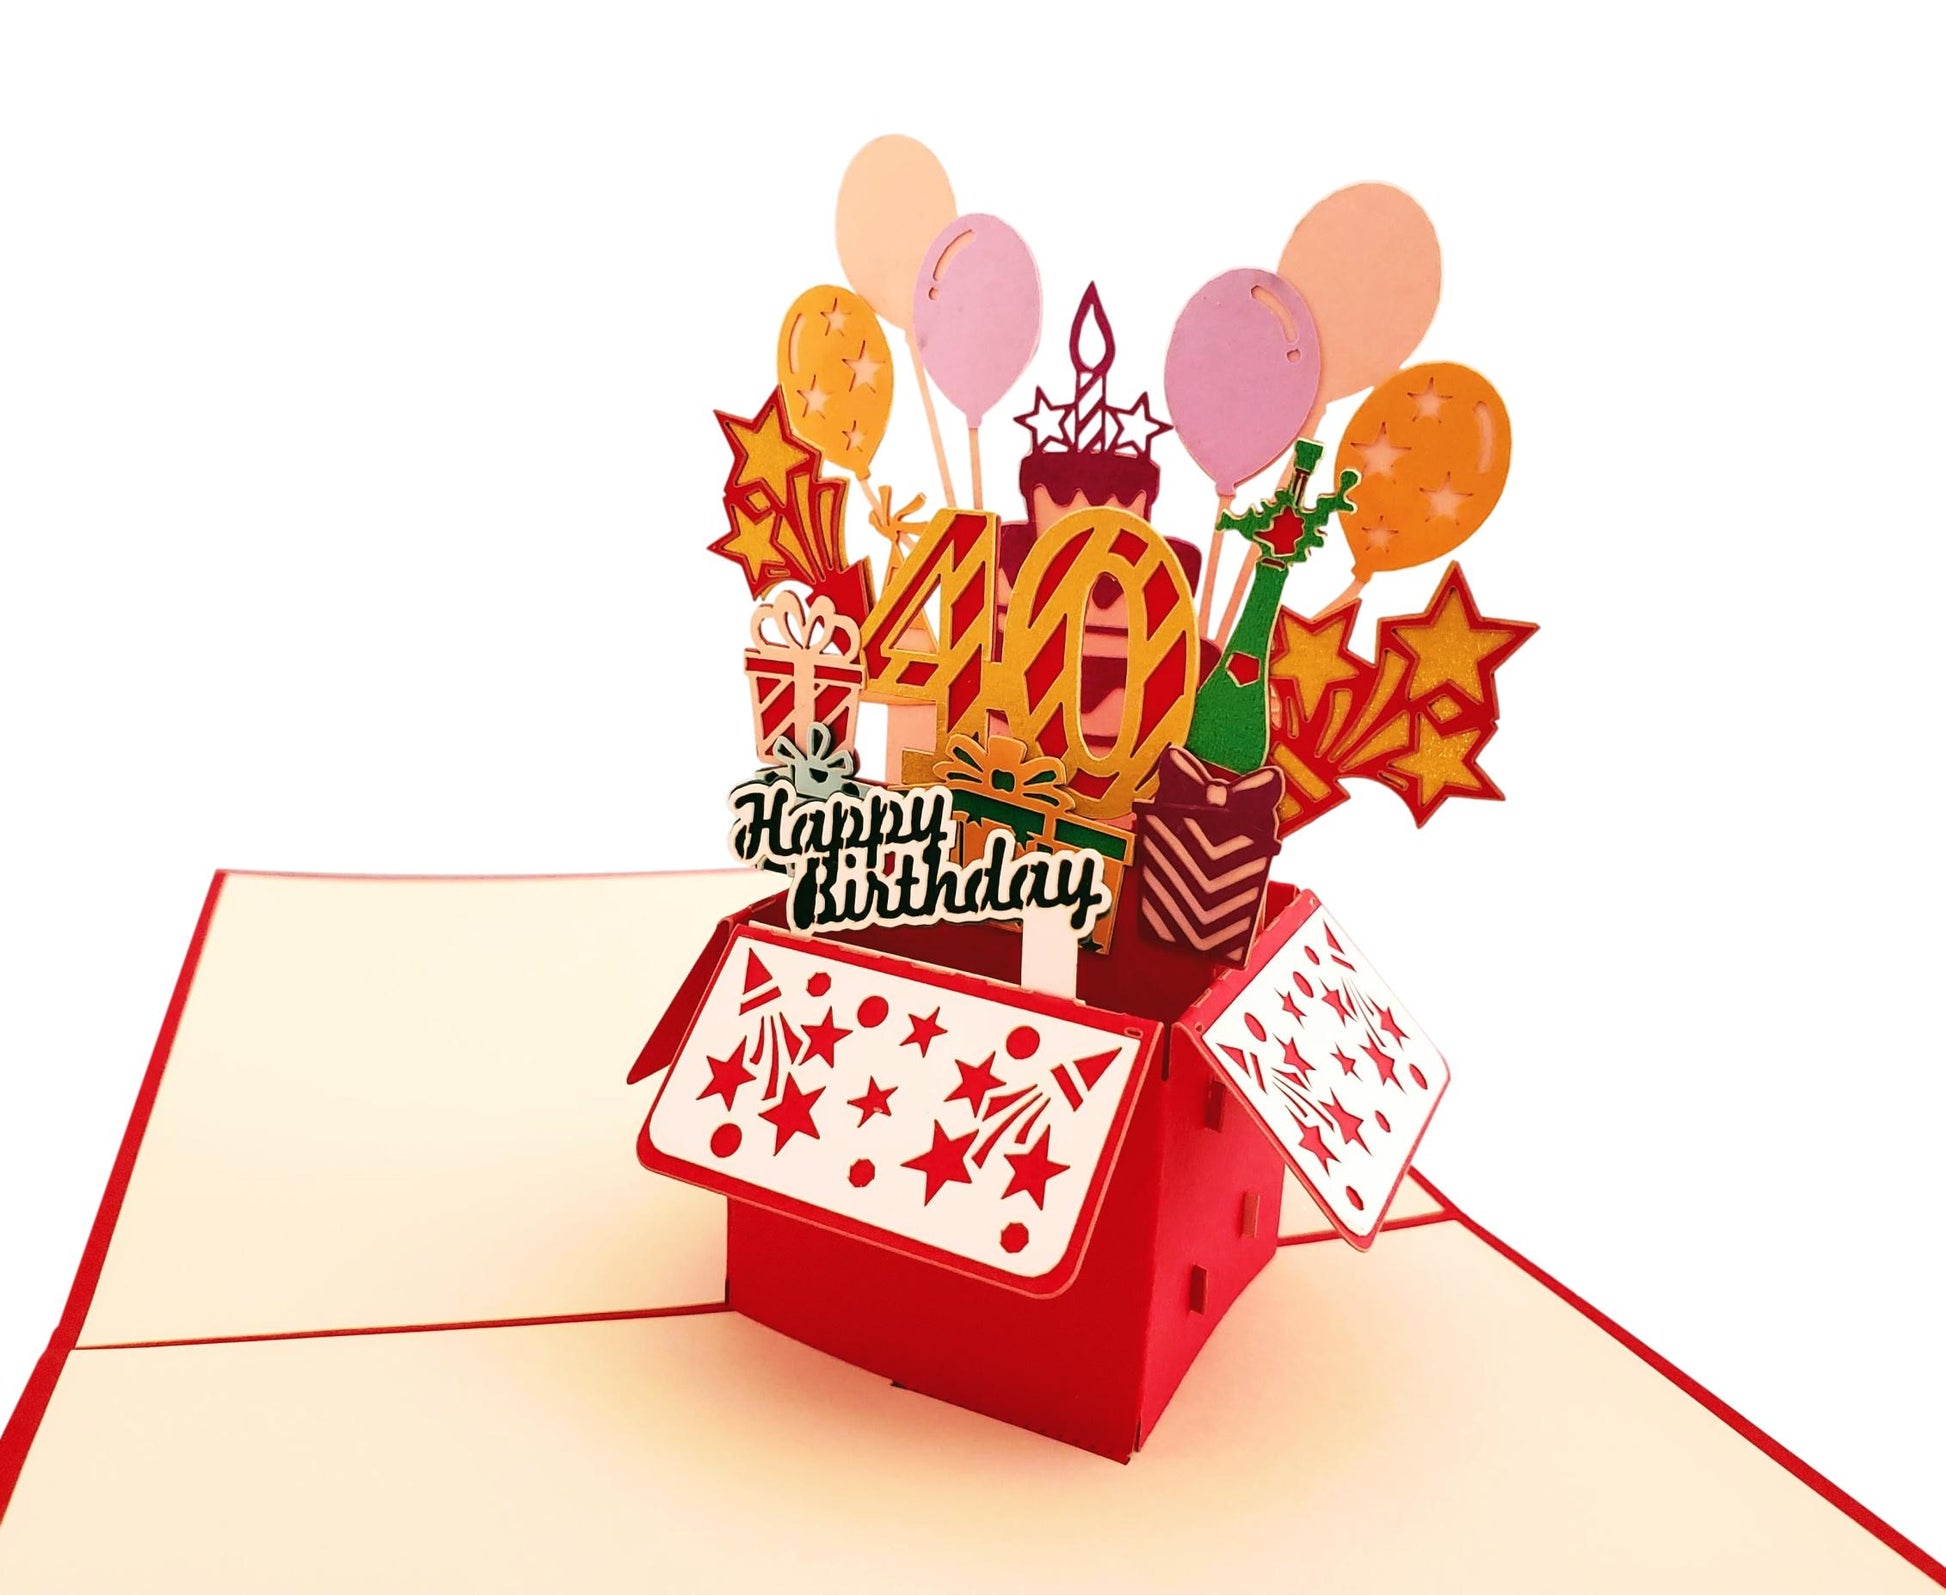 Happy 40th Birthday Red Party Box 3D Pop Up Greeting Card - Birthday - Fun - Milestone - Special Day - iGifts And Cards